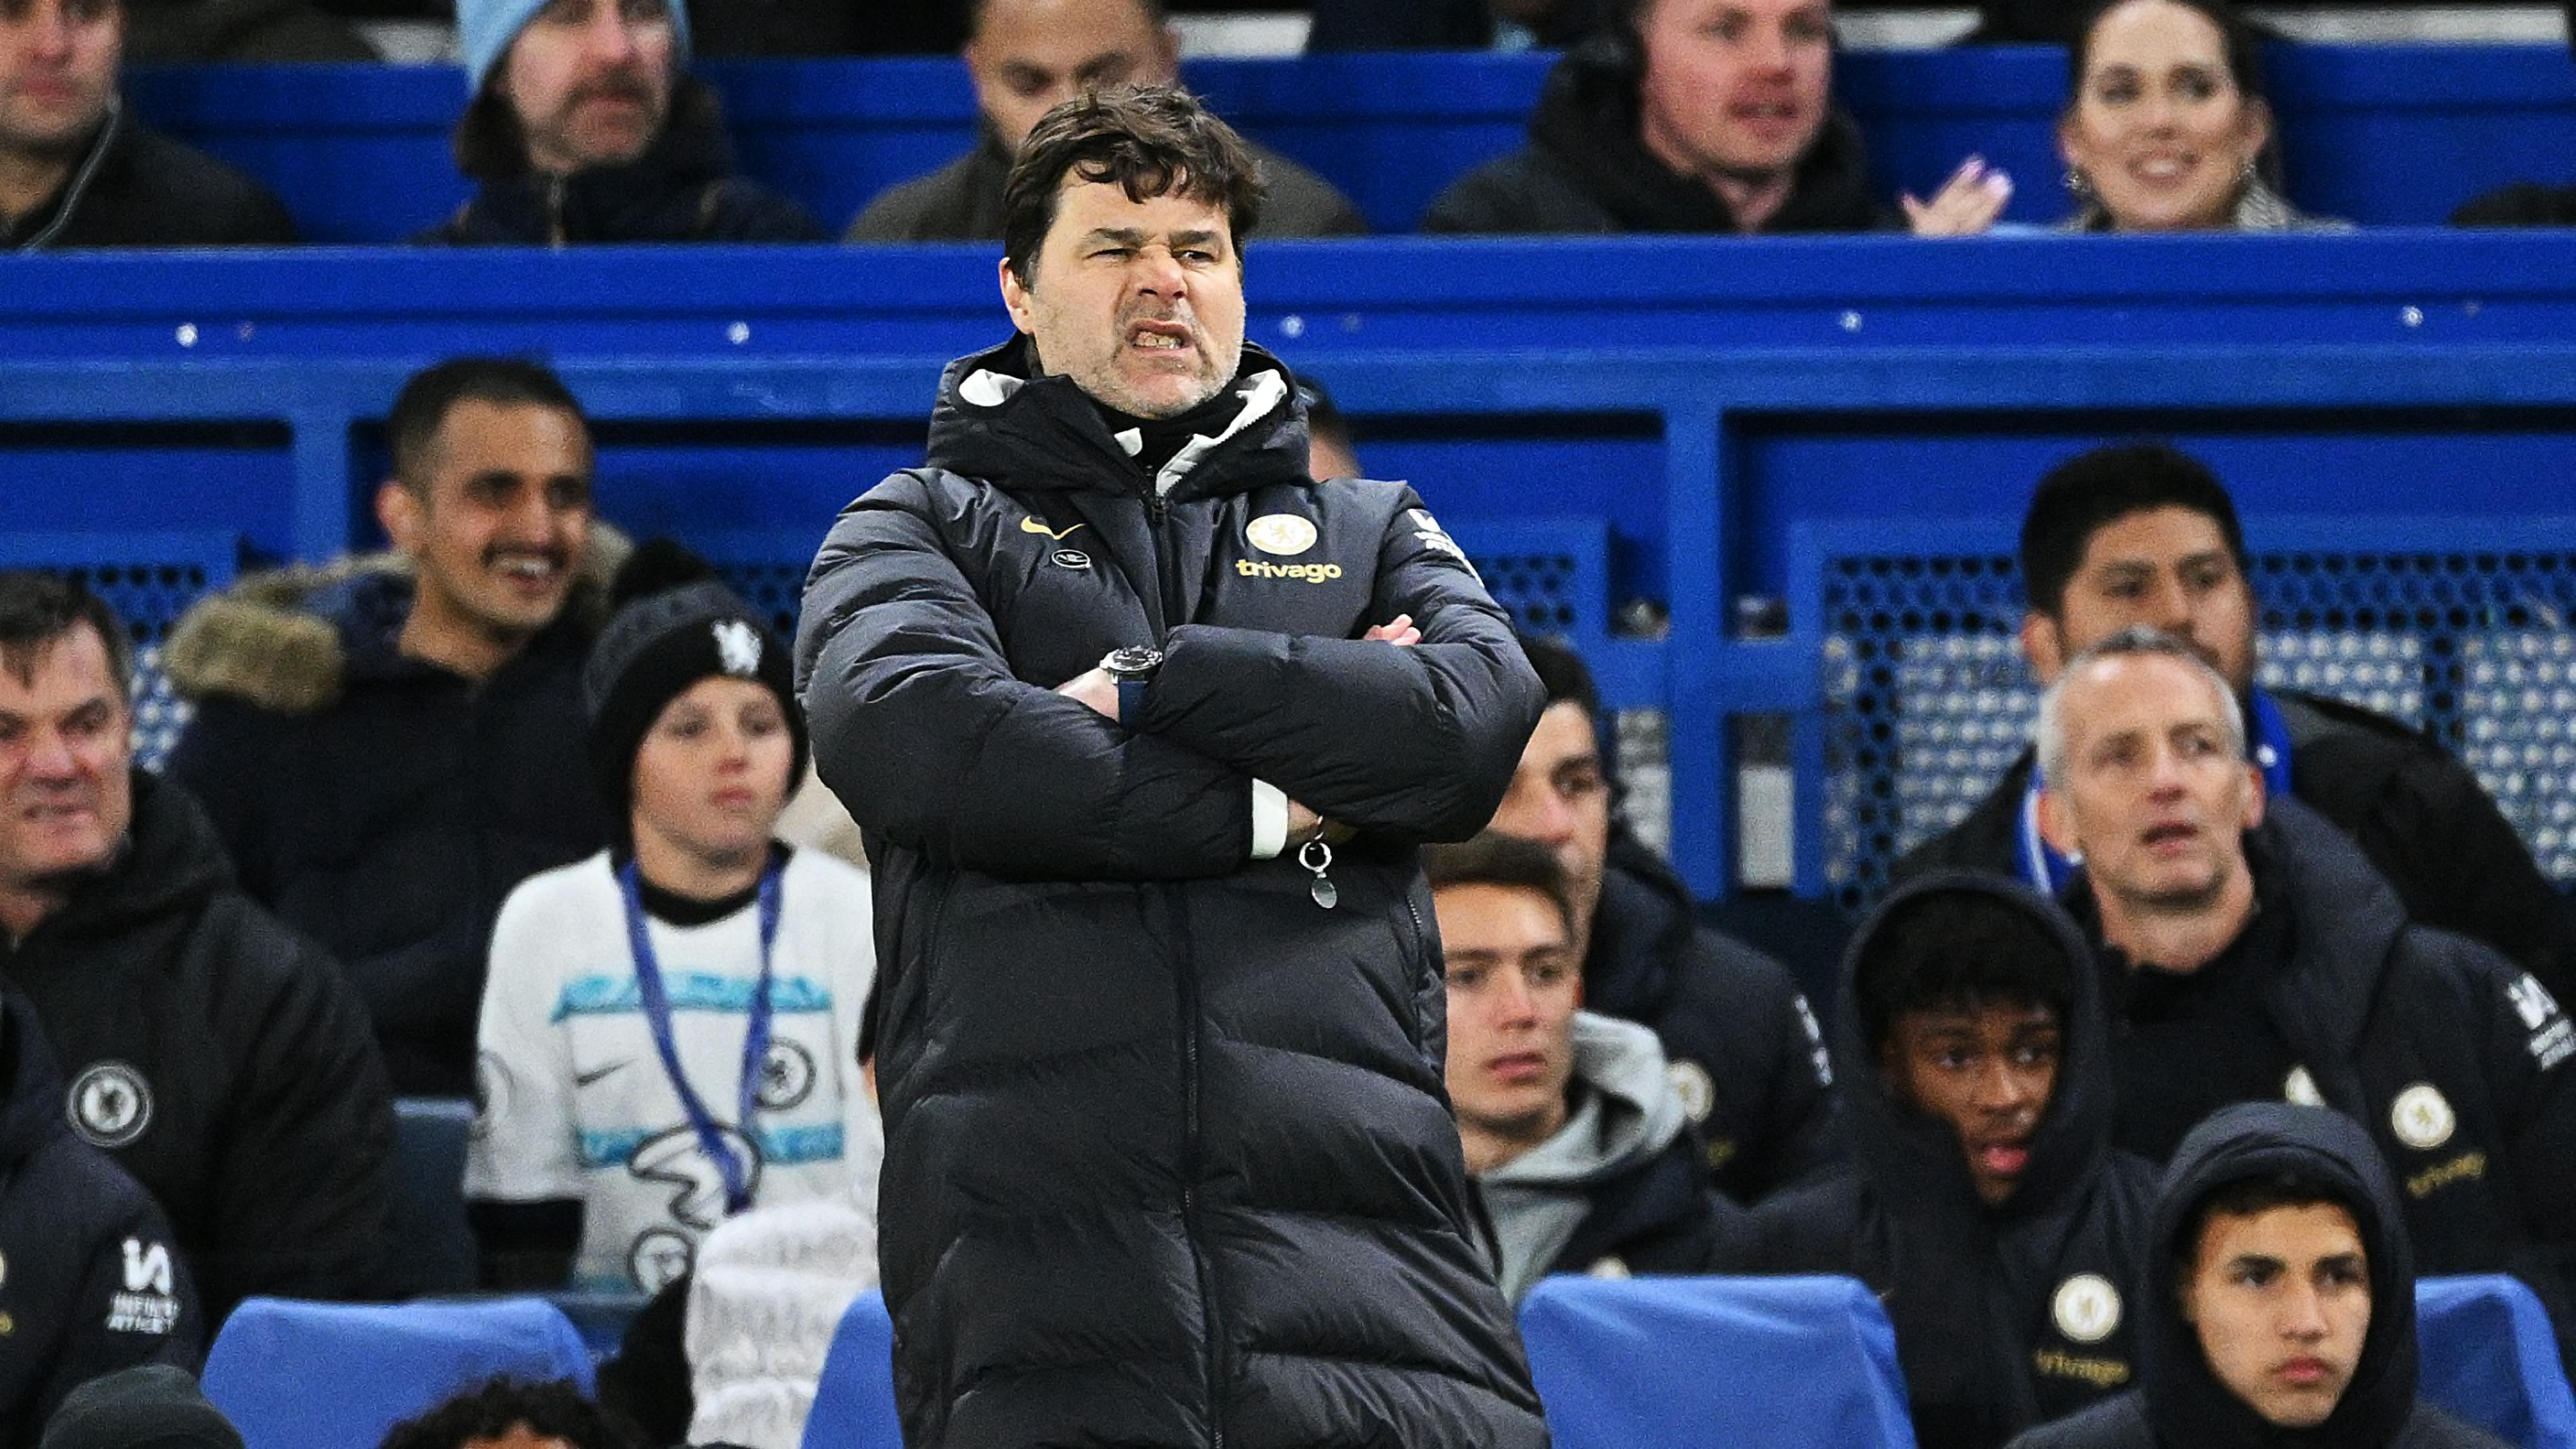 Mauricio Pochettino left furious by journalist questions after Everton penalty incident